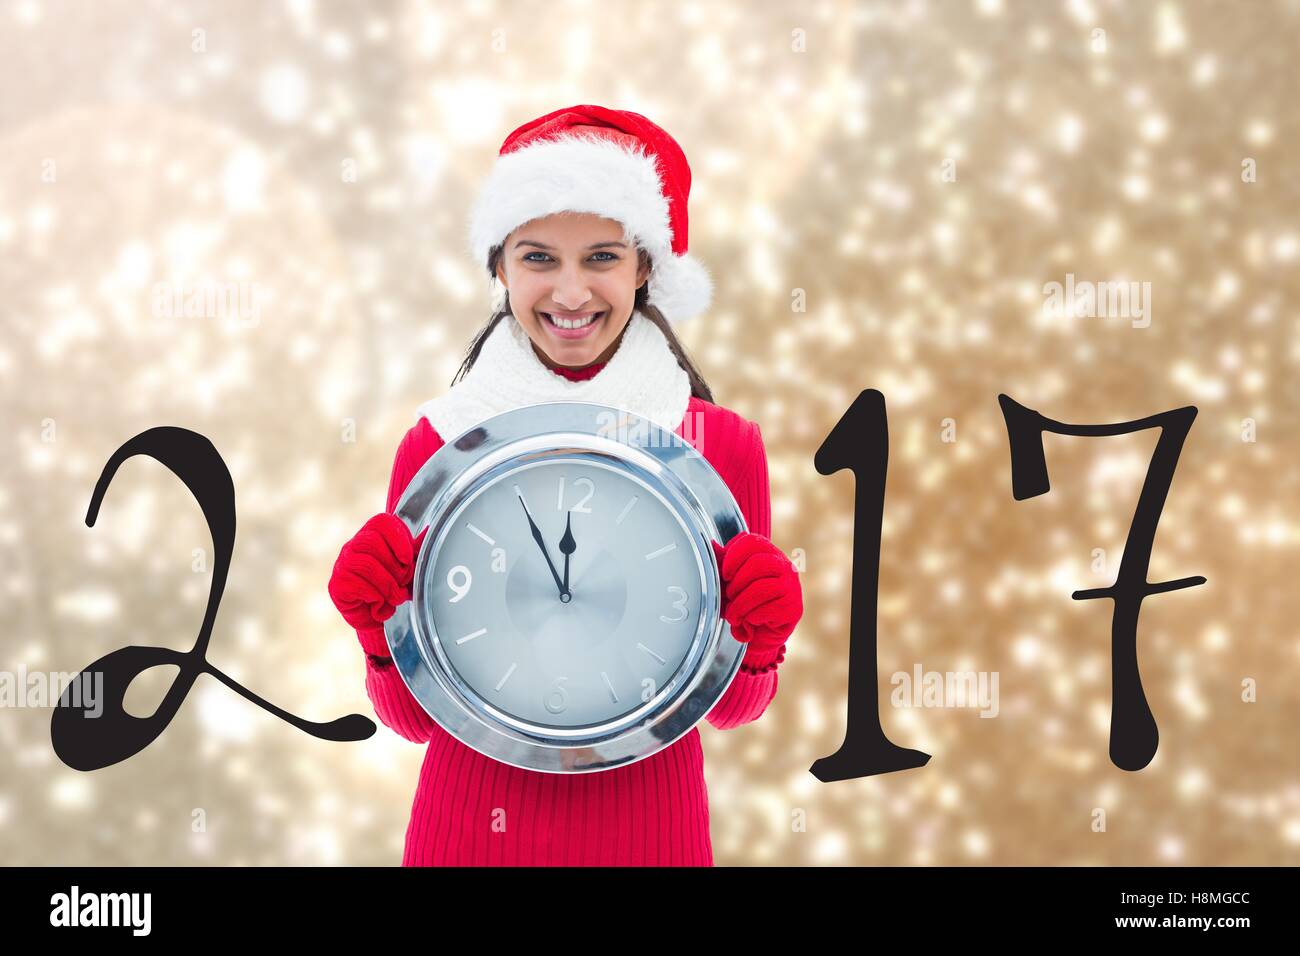 Happy Girl Holding Clock on Blurry Background Composite Stock Photo